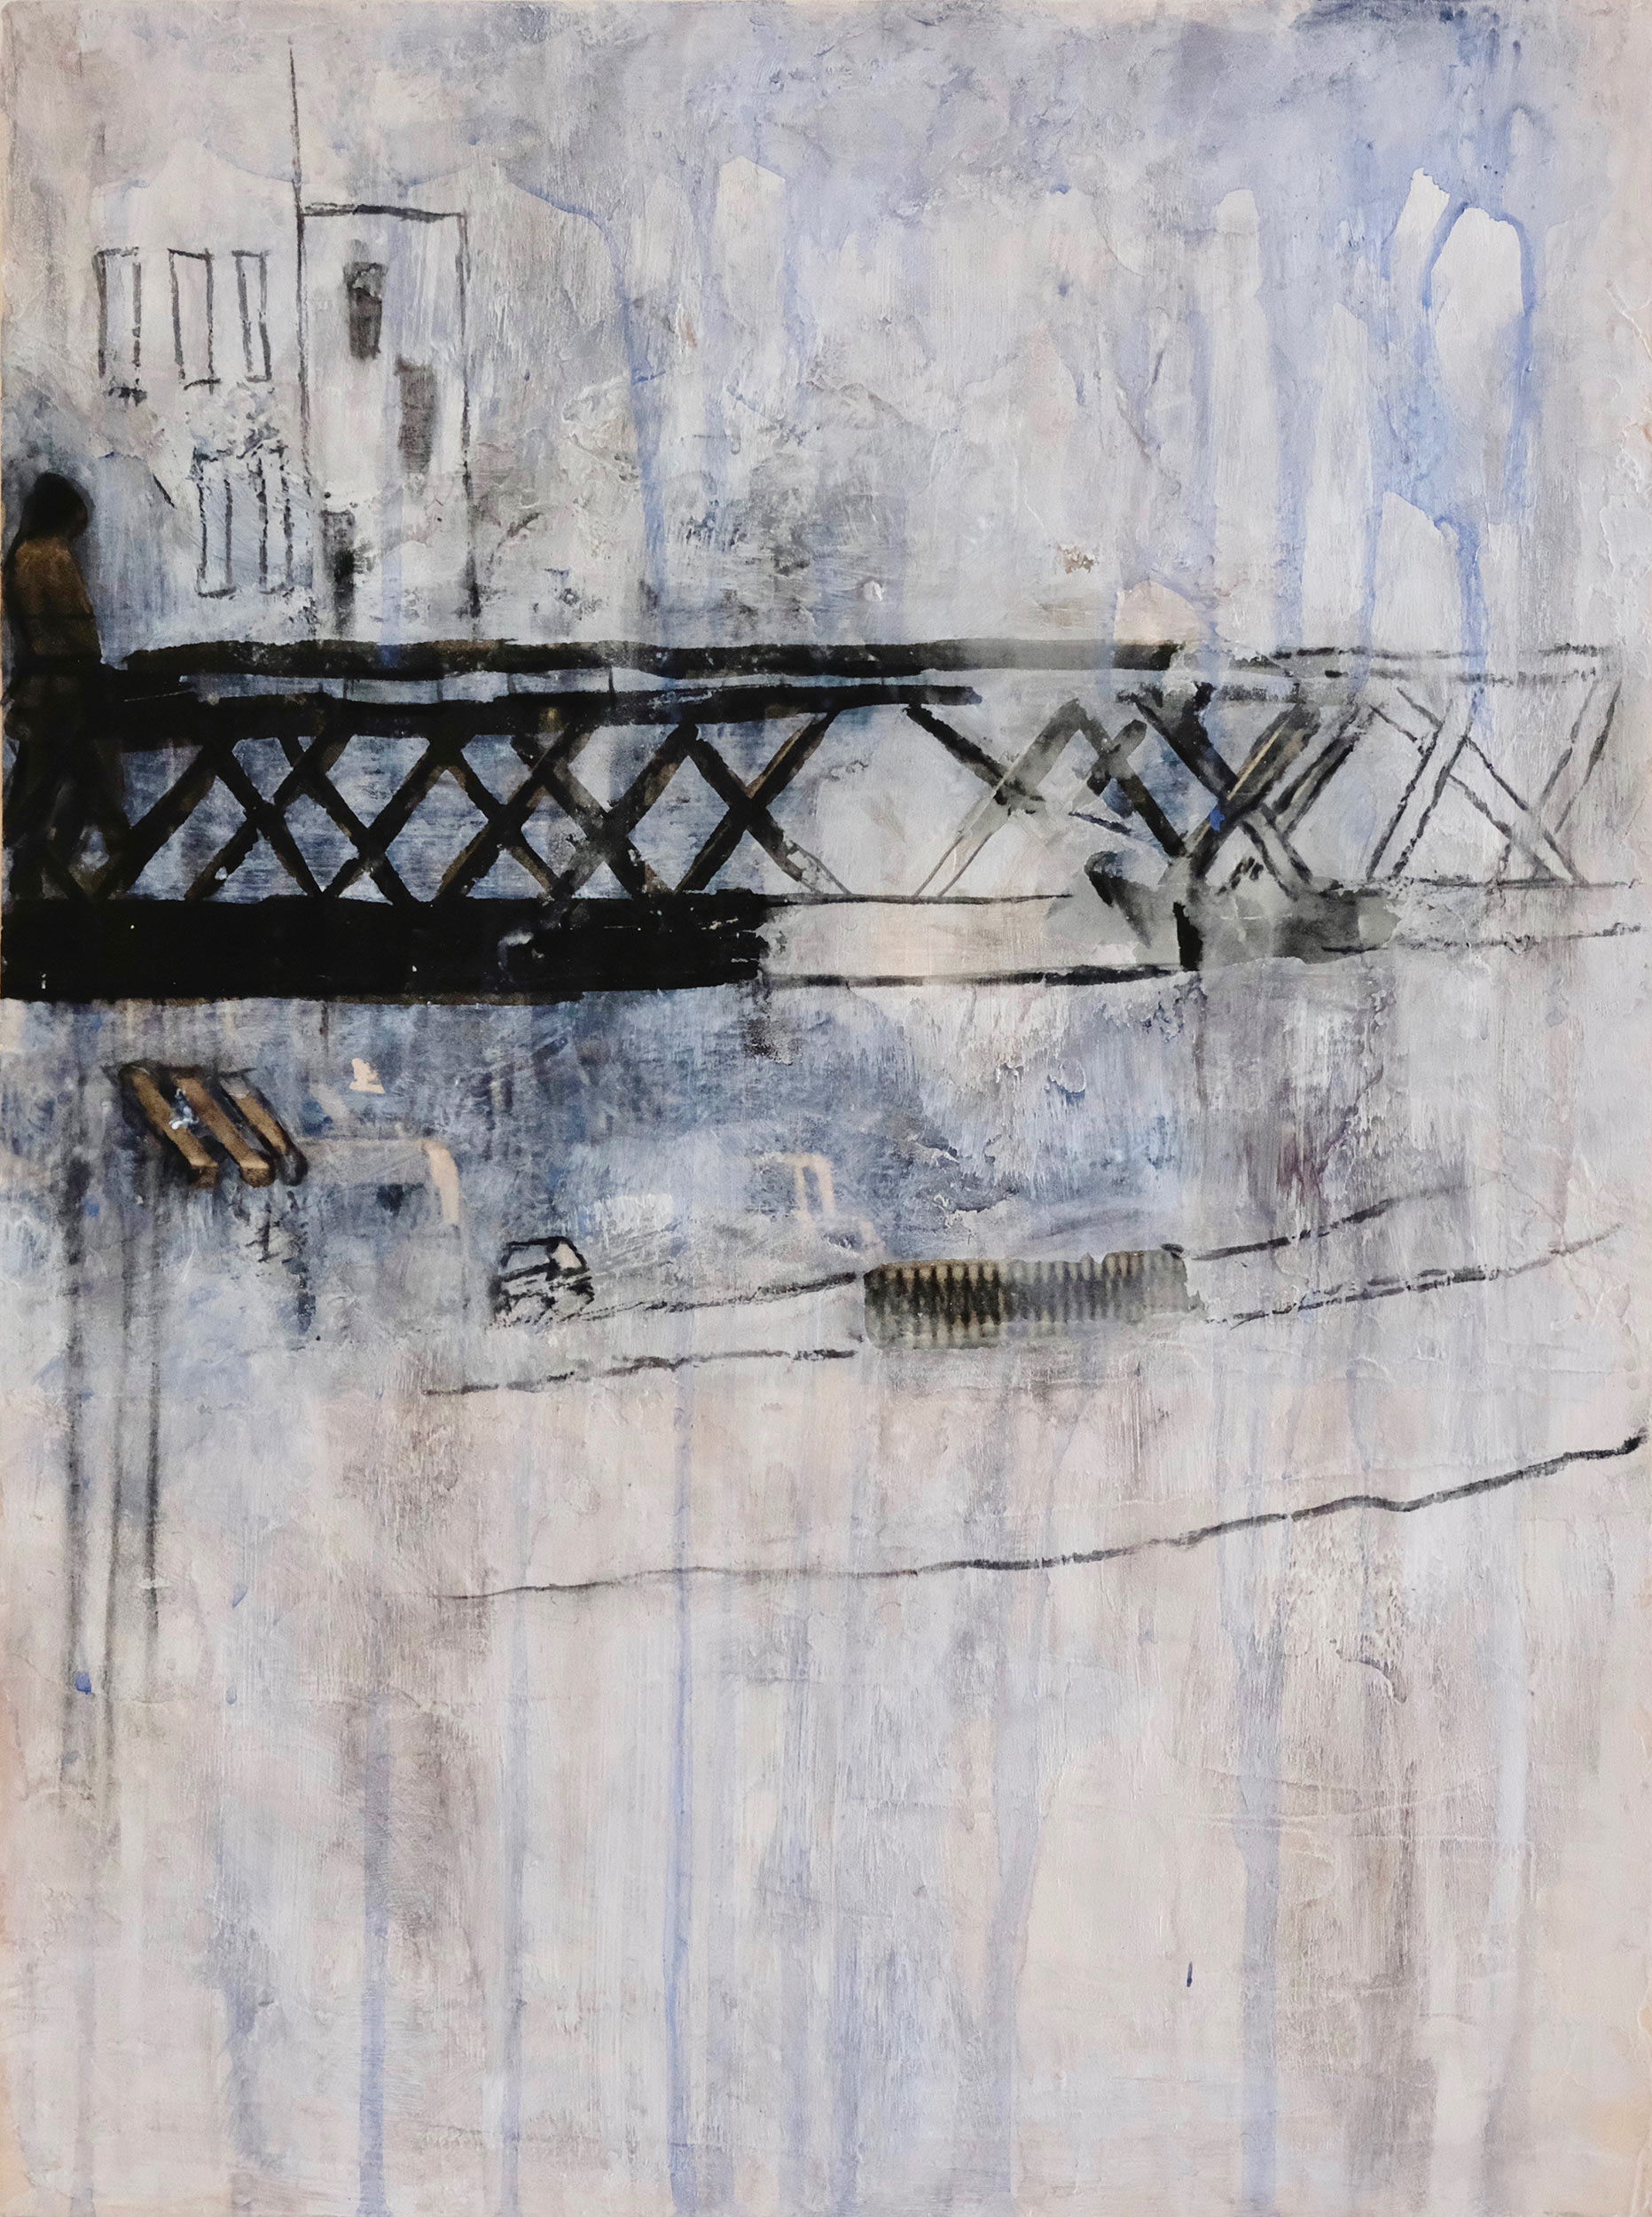   Milano I , 2019, photo transfer, acrylic and charcoal on cradled hardboard, 16x12 inches, SOLD 